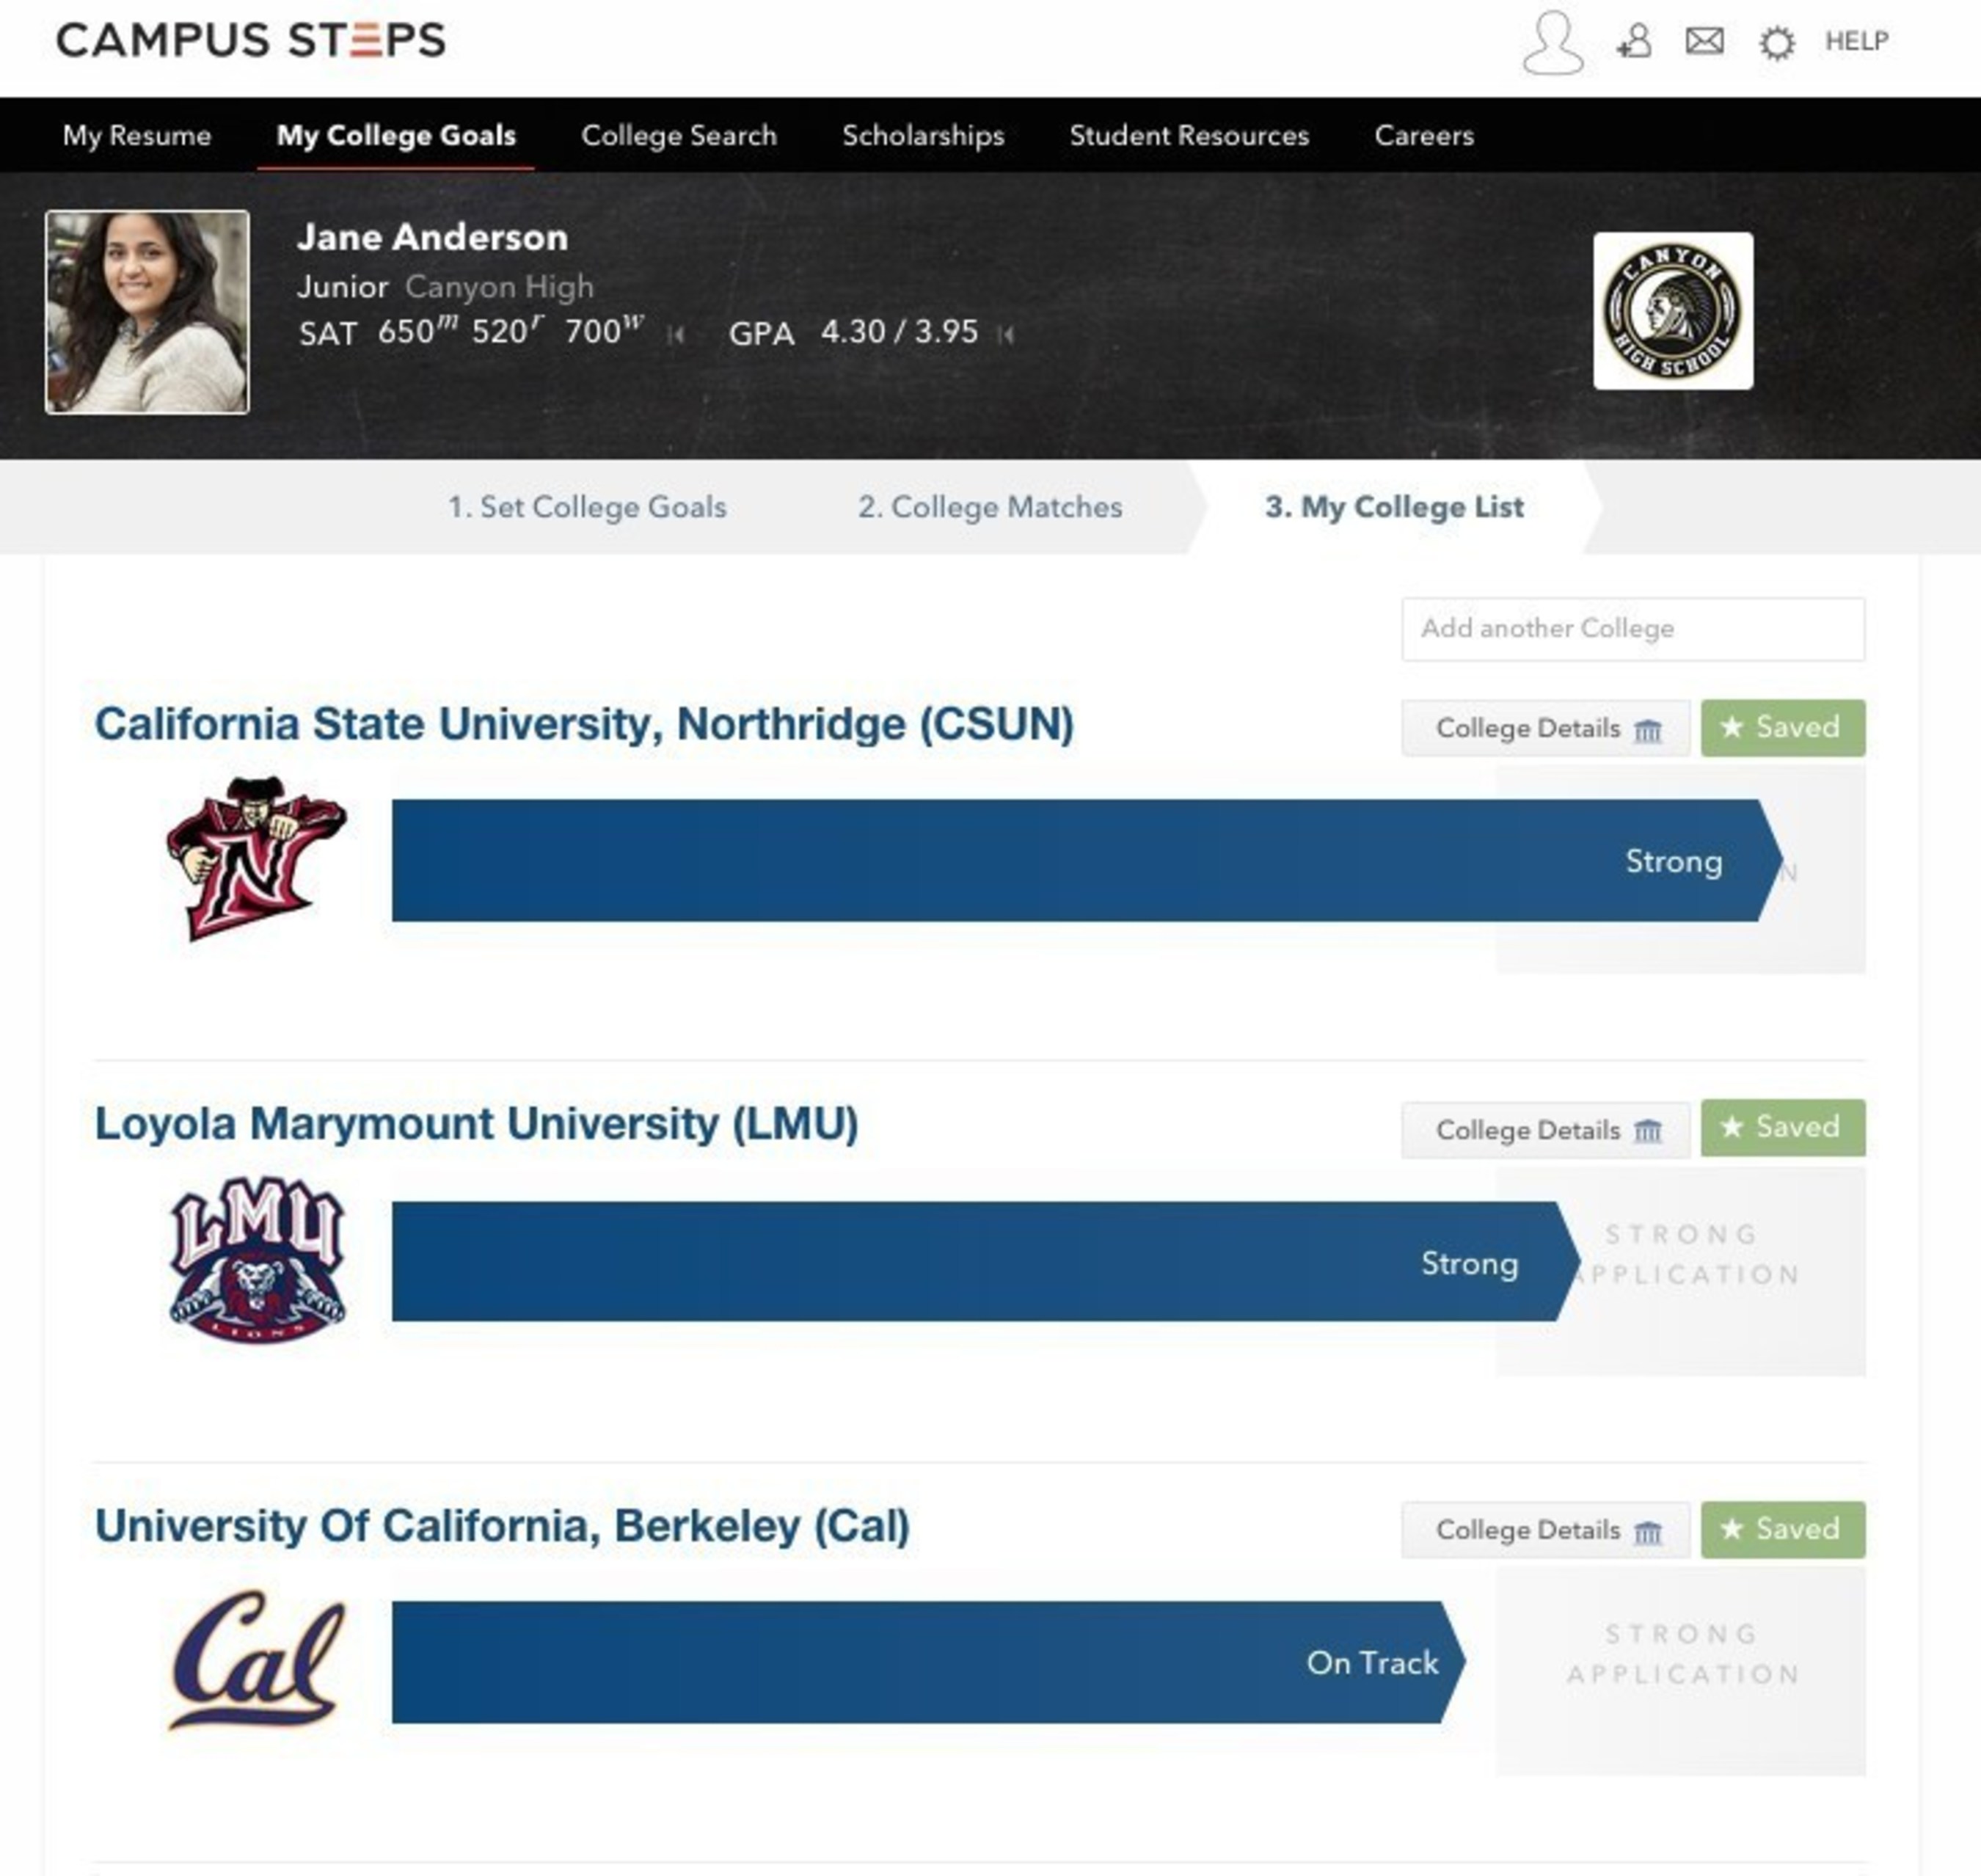 Campus Steps allows students to manage their college futures including searching for the right college for them.